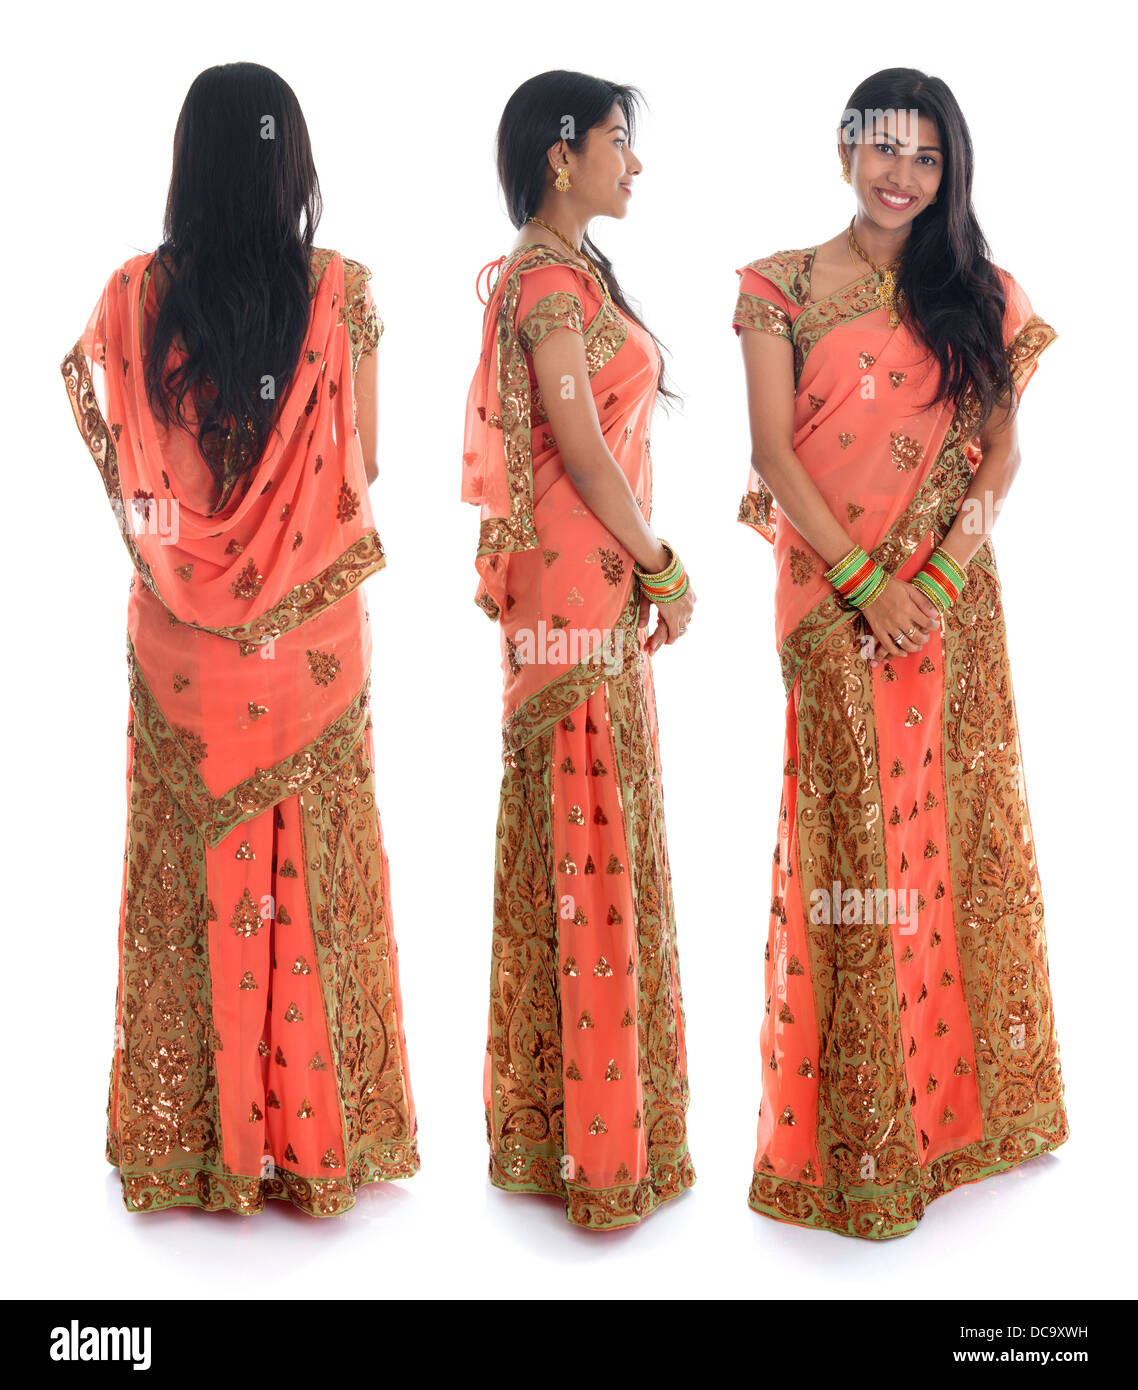 Full body traditional Indian woman in sari costume different angle front, side and rear view standing isolated on white background. Stock Photo